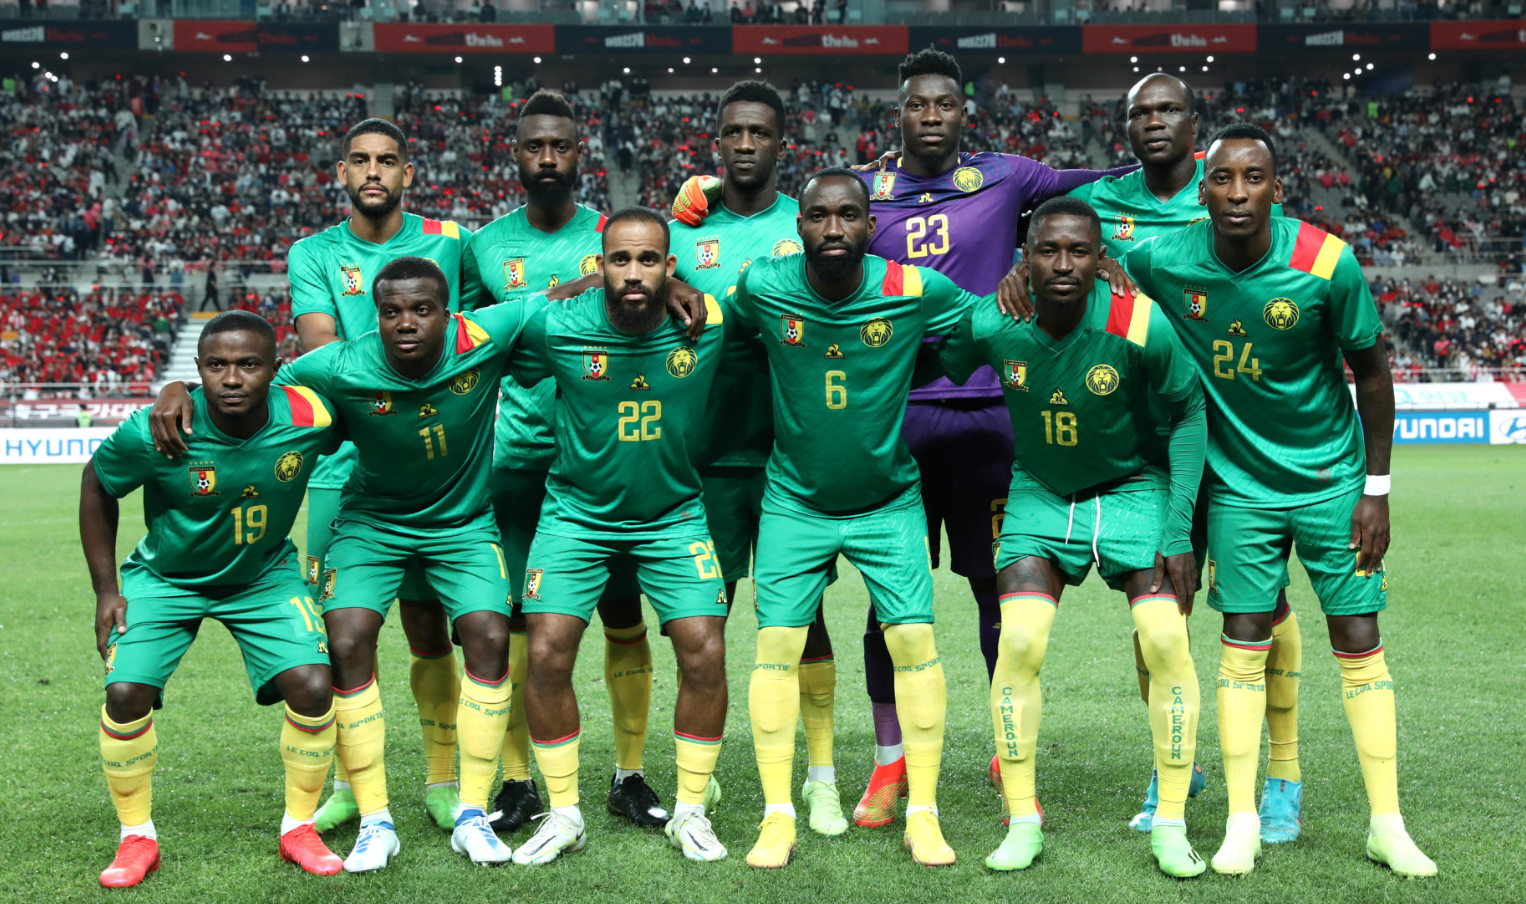 Cameroon vs Serbia, November 28: Head-to-Head Statistics, Line-ups, Prediction for the 2022 World Cup Match